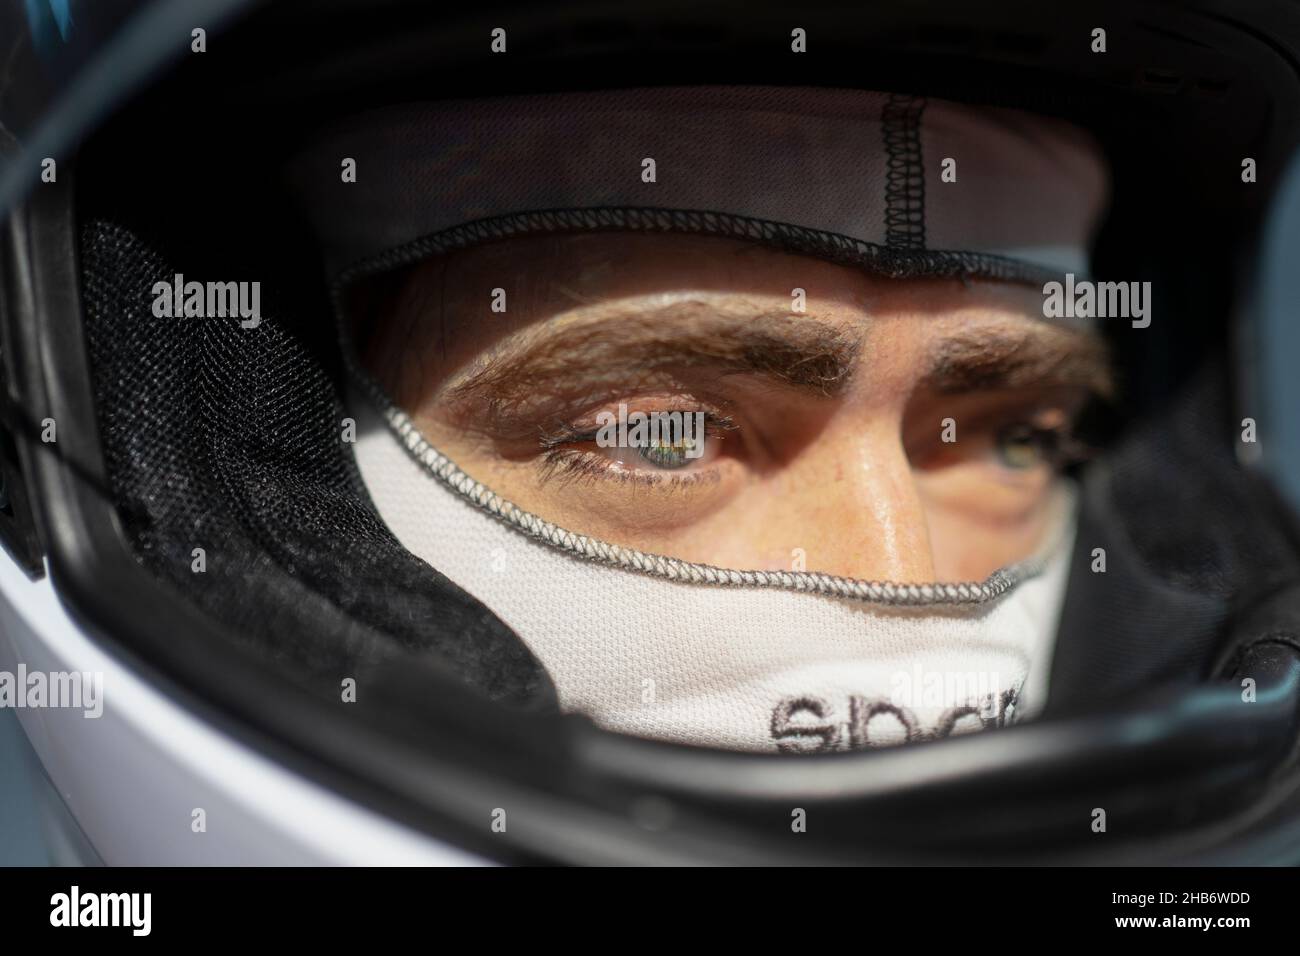 Close up portrait of a handsome young man wearing a formula one racing helmet. Stock Photo